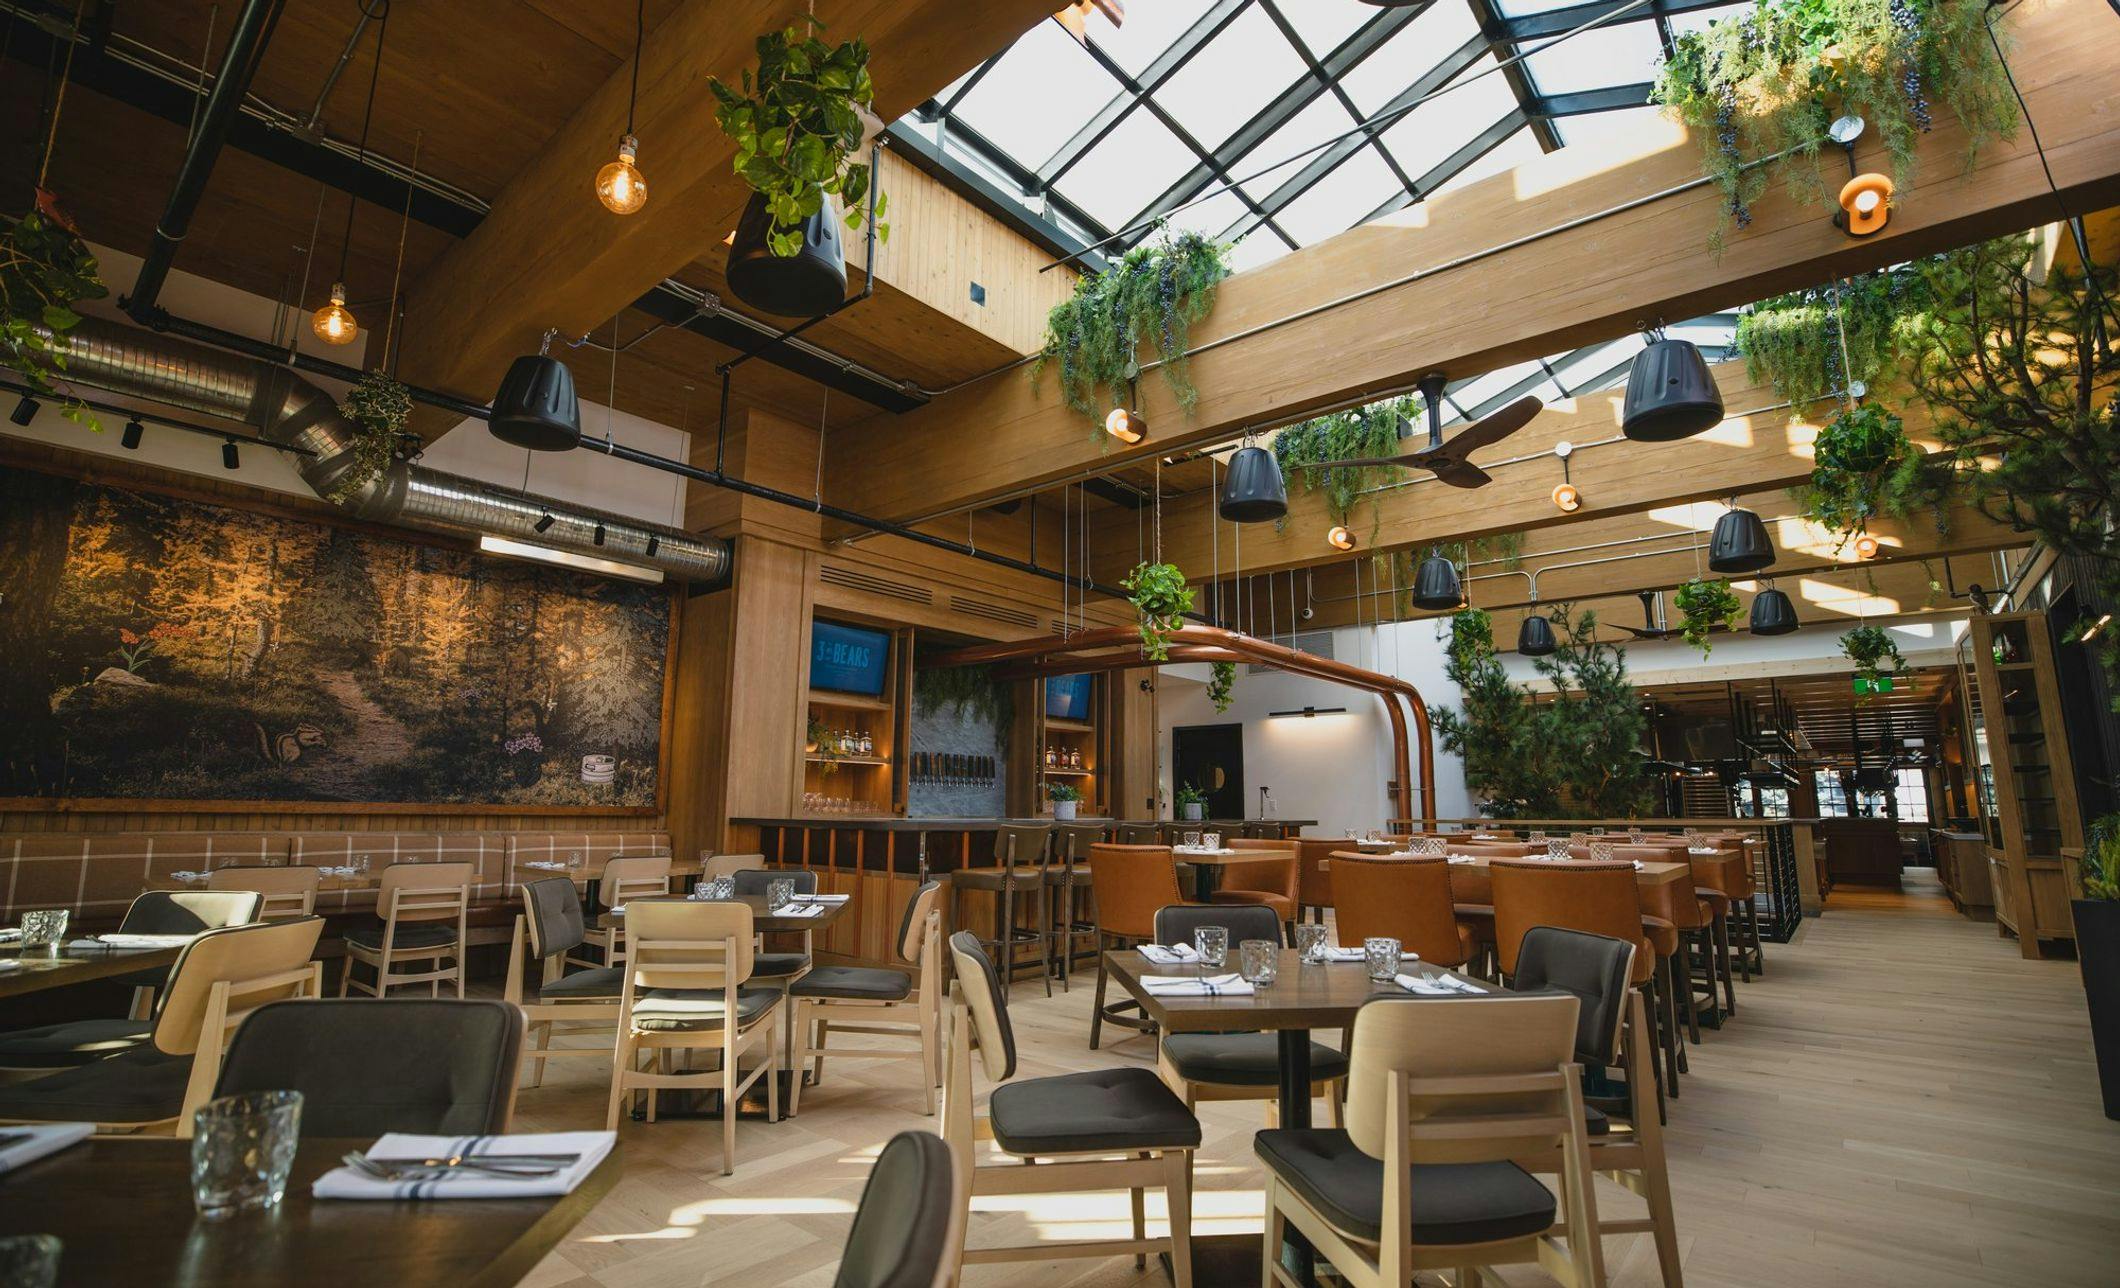 Restaurant seating with retractable glass roof and indoor plants 